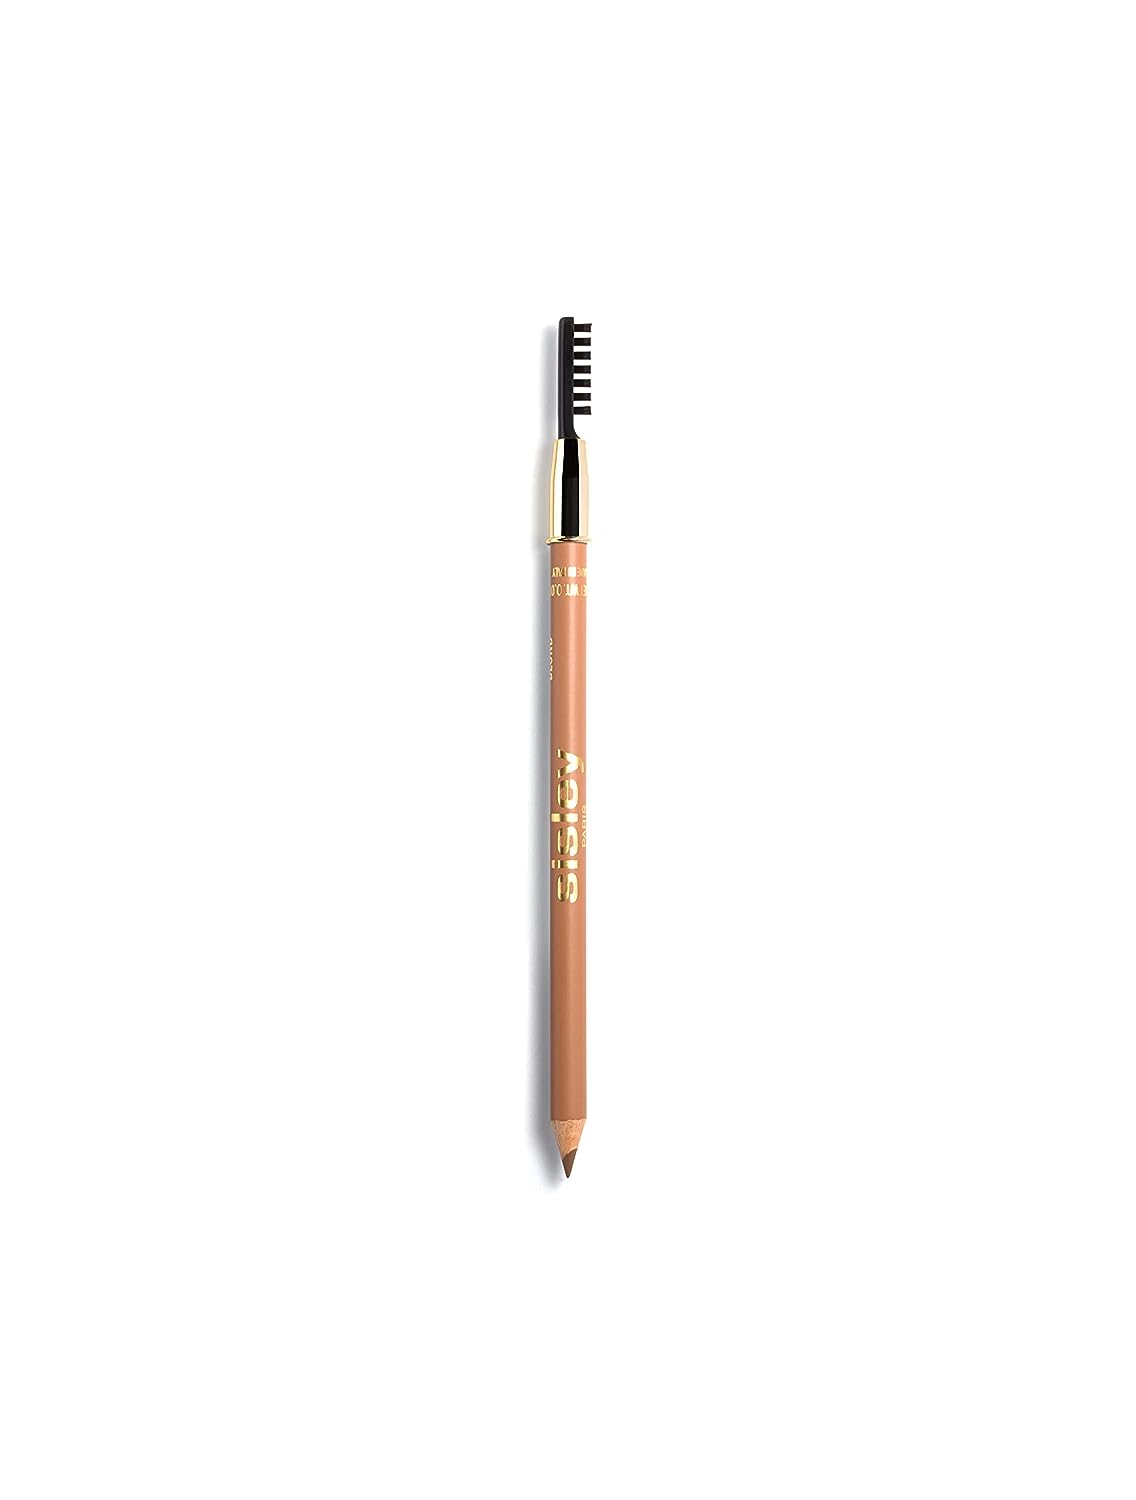 sisley paris Phyto Sourcils Perfect Eyebrow Pencil with Brush and Sharpener for Women, # 01 Blond, 0.05